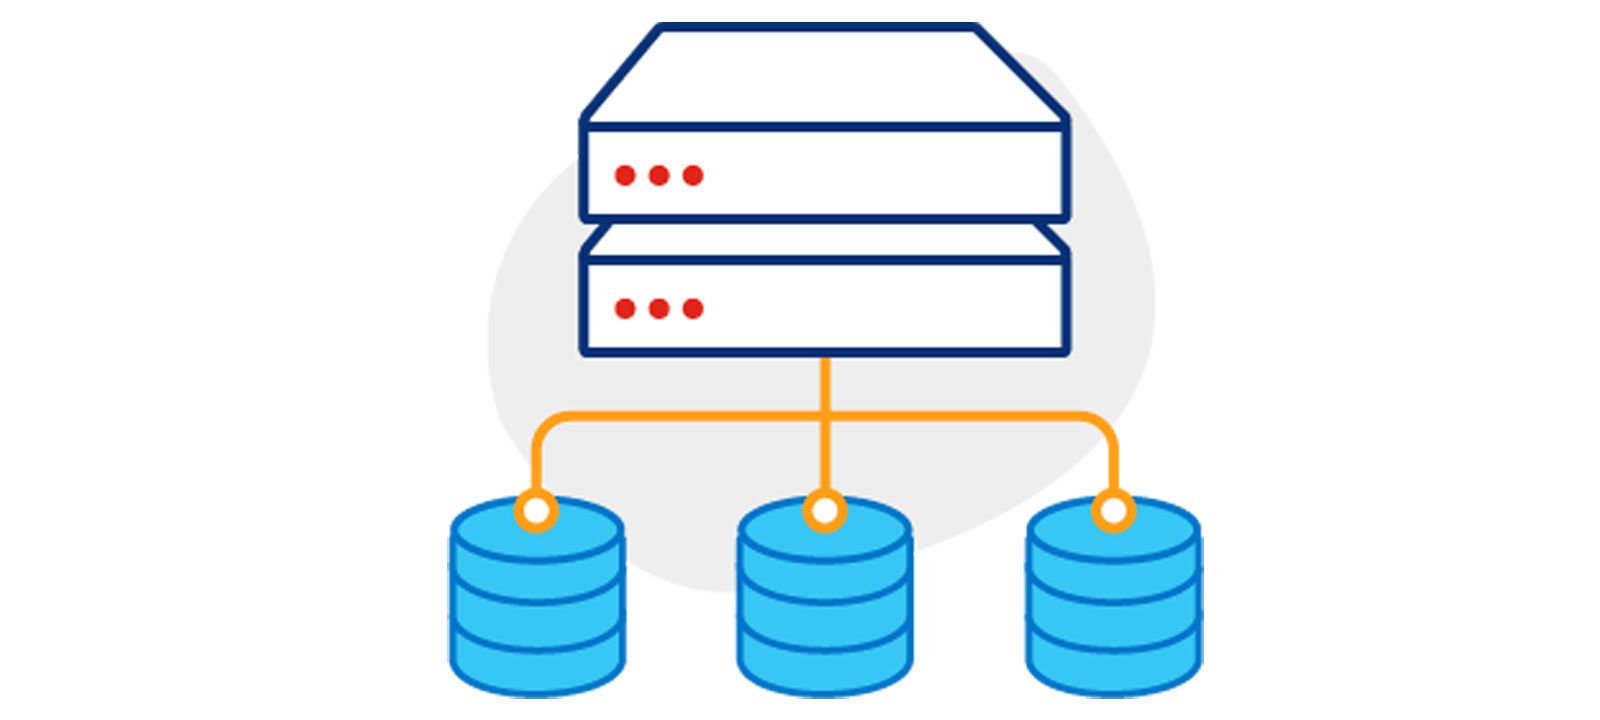 Ilustration of a server stack with three orange lines connecting to three stack icons  